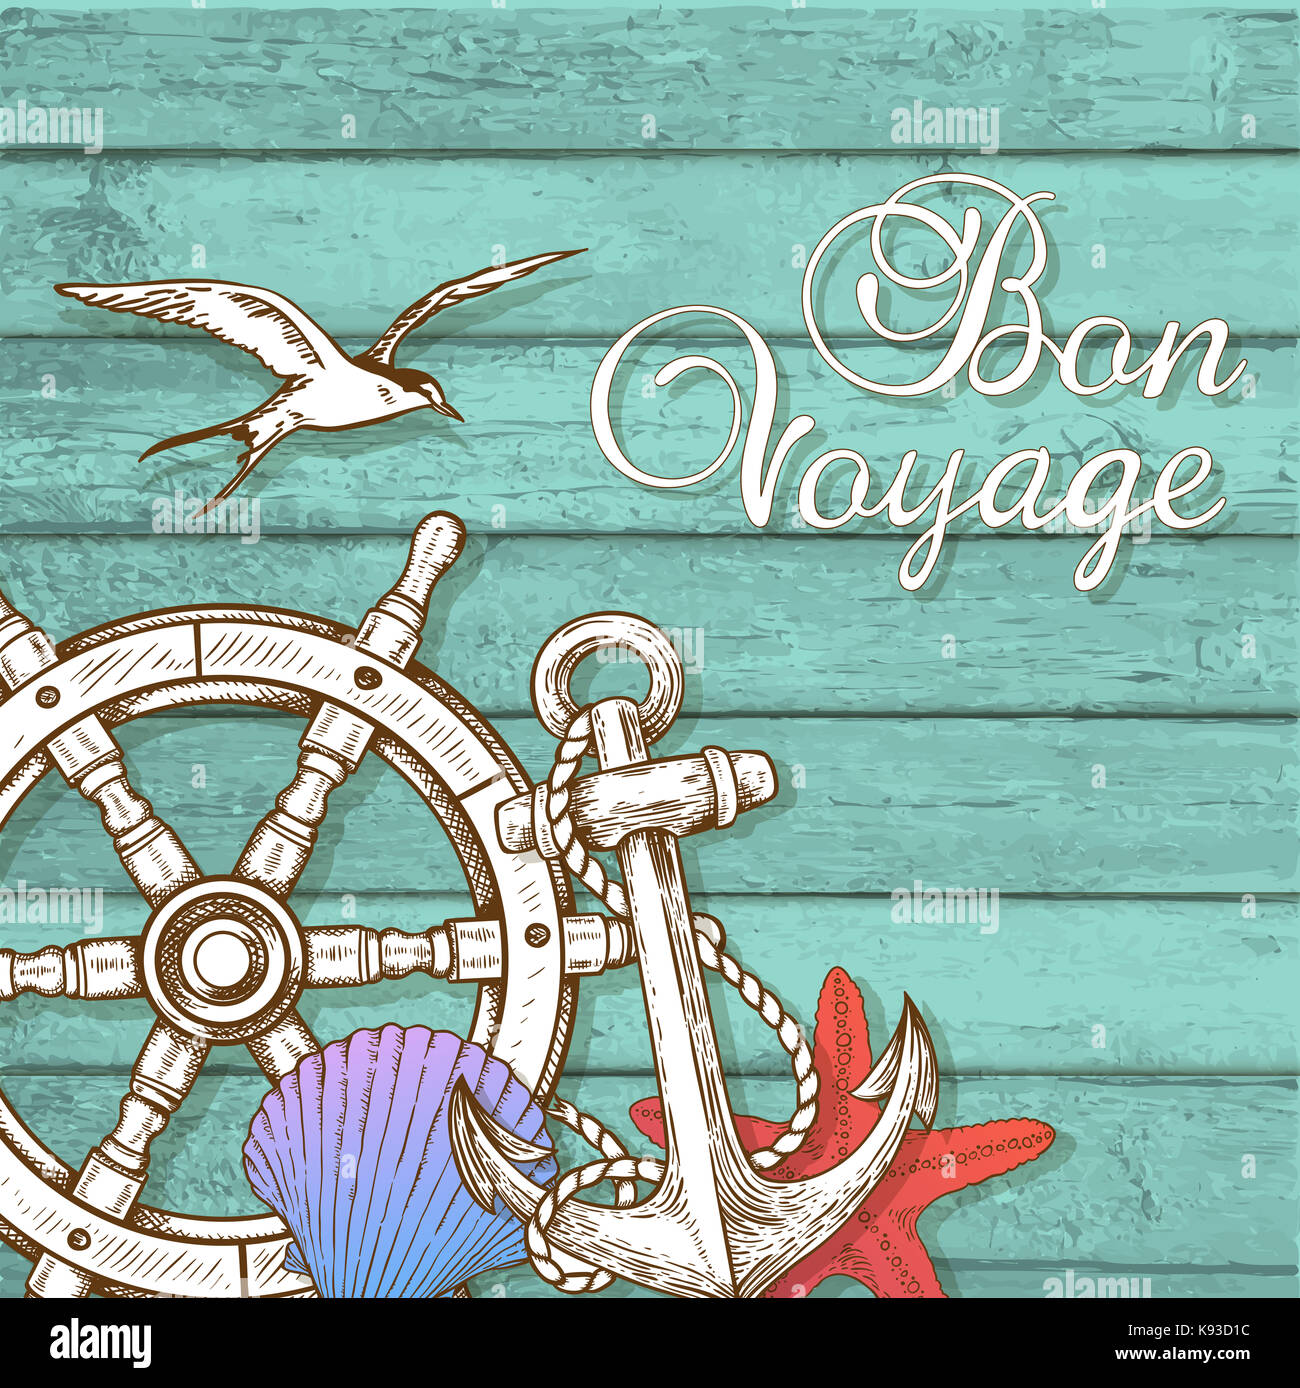 Vintage travel background with hand wheel and anchor on a green wooden surface. Bon voyage lettering. Stock Photo